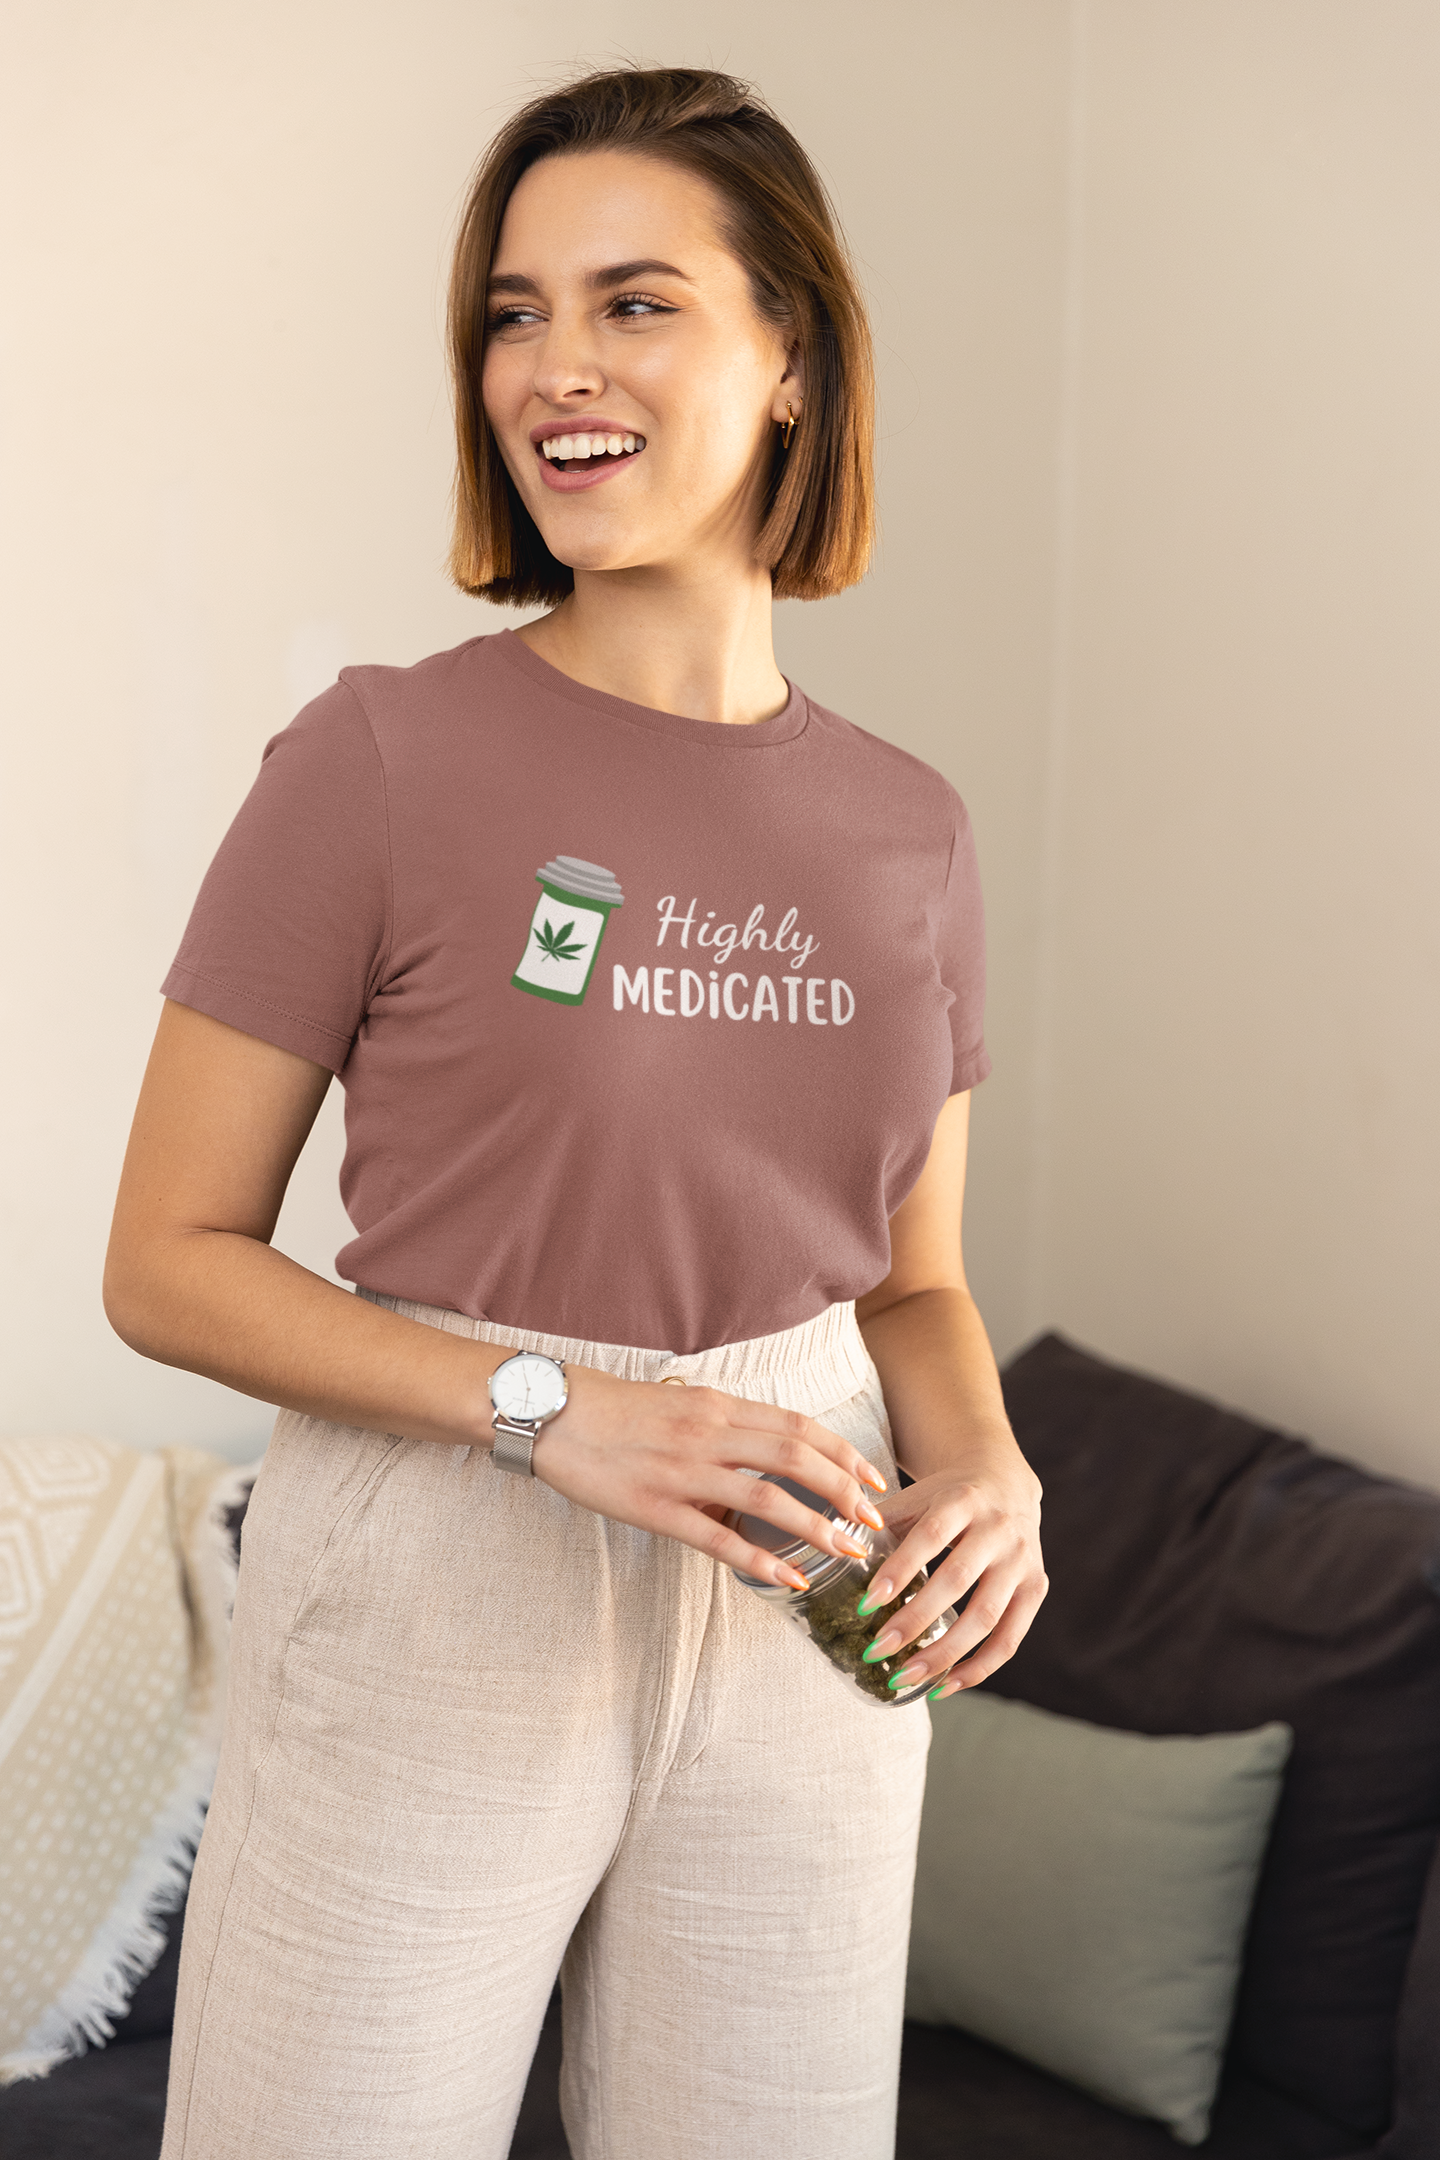 Highly Medicated Tee